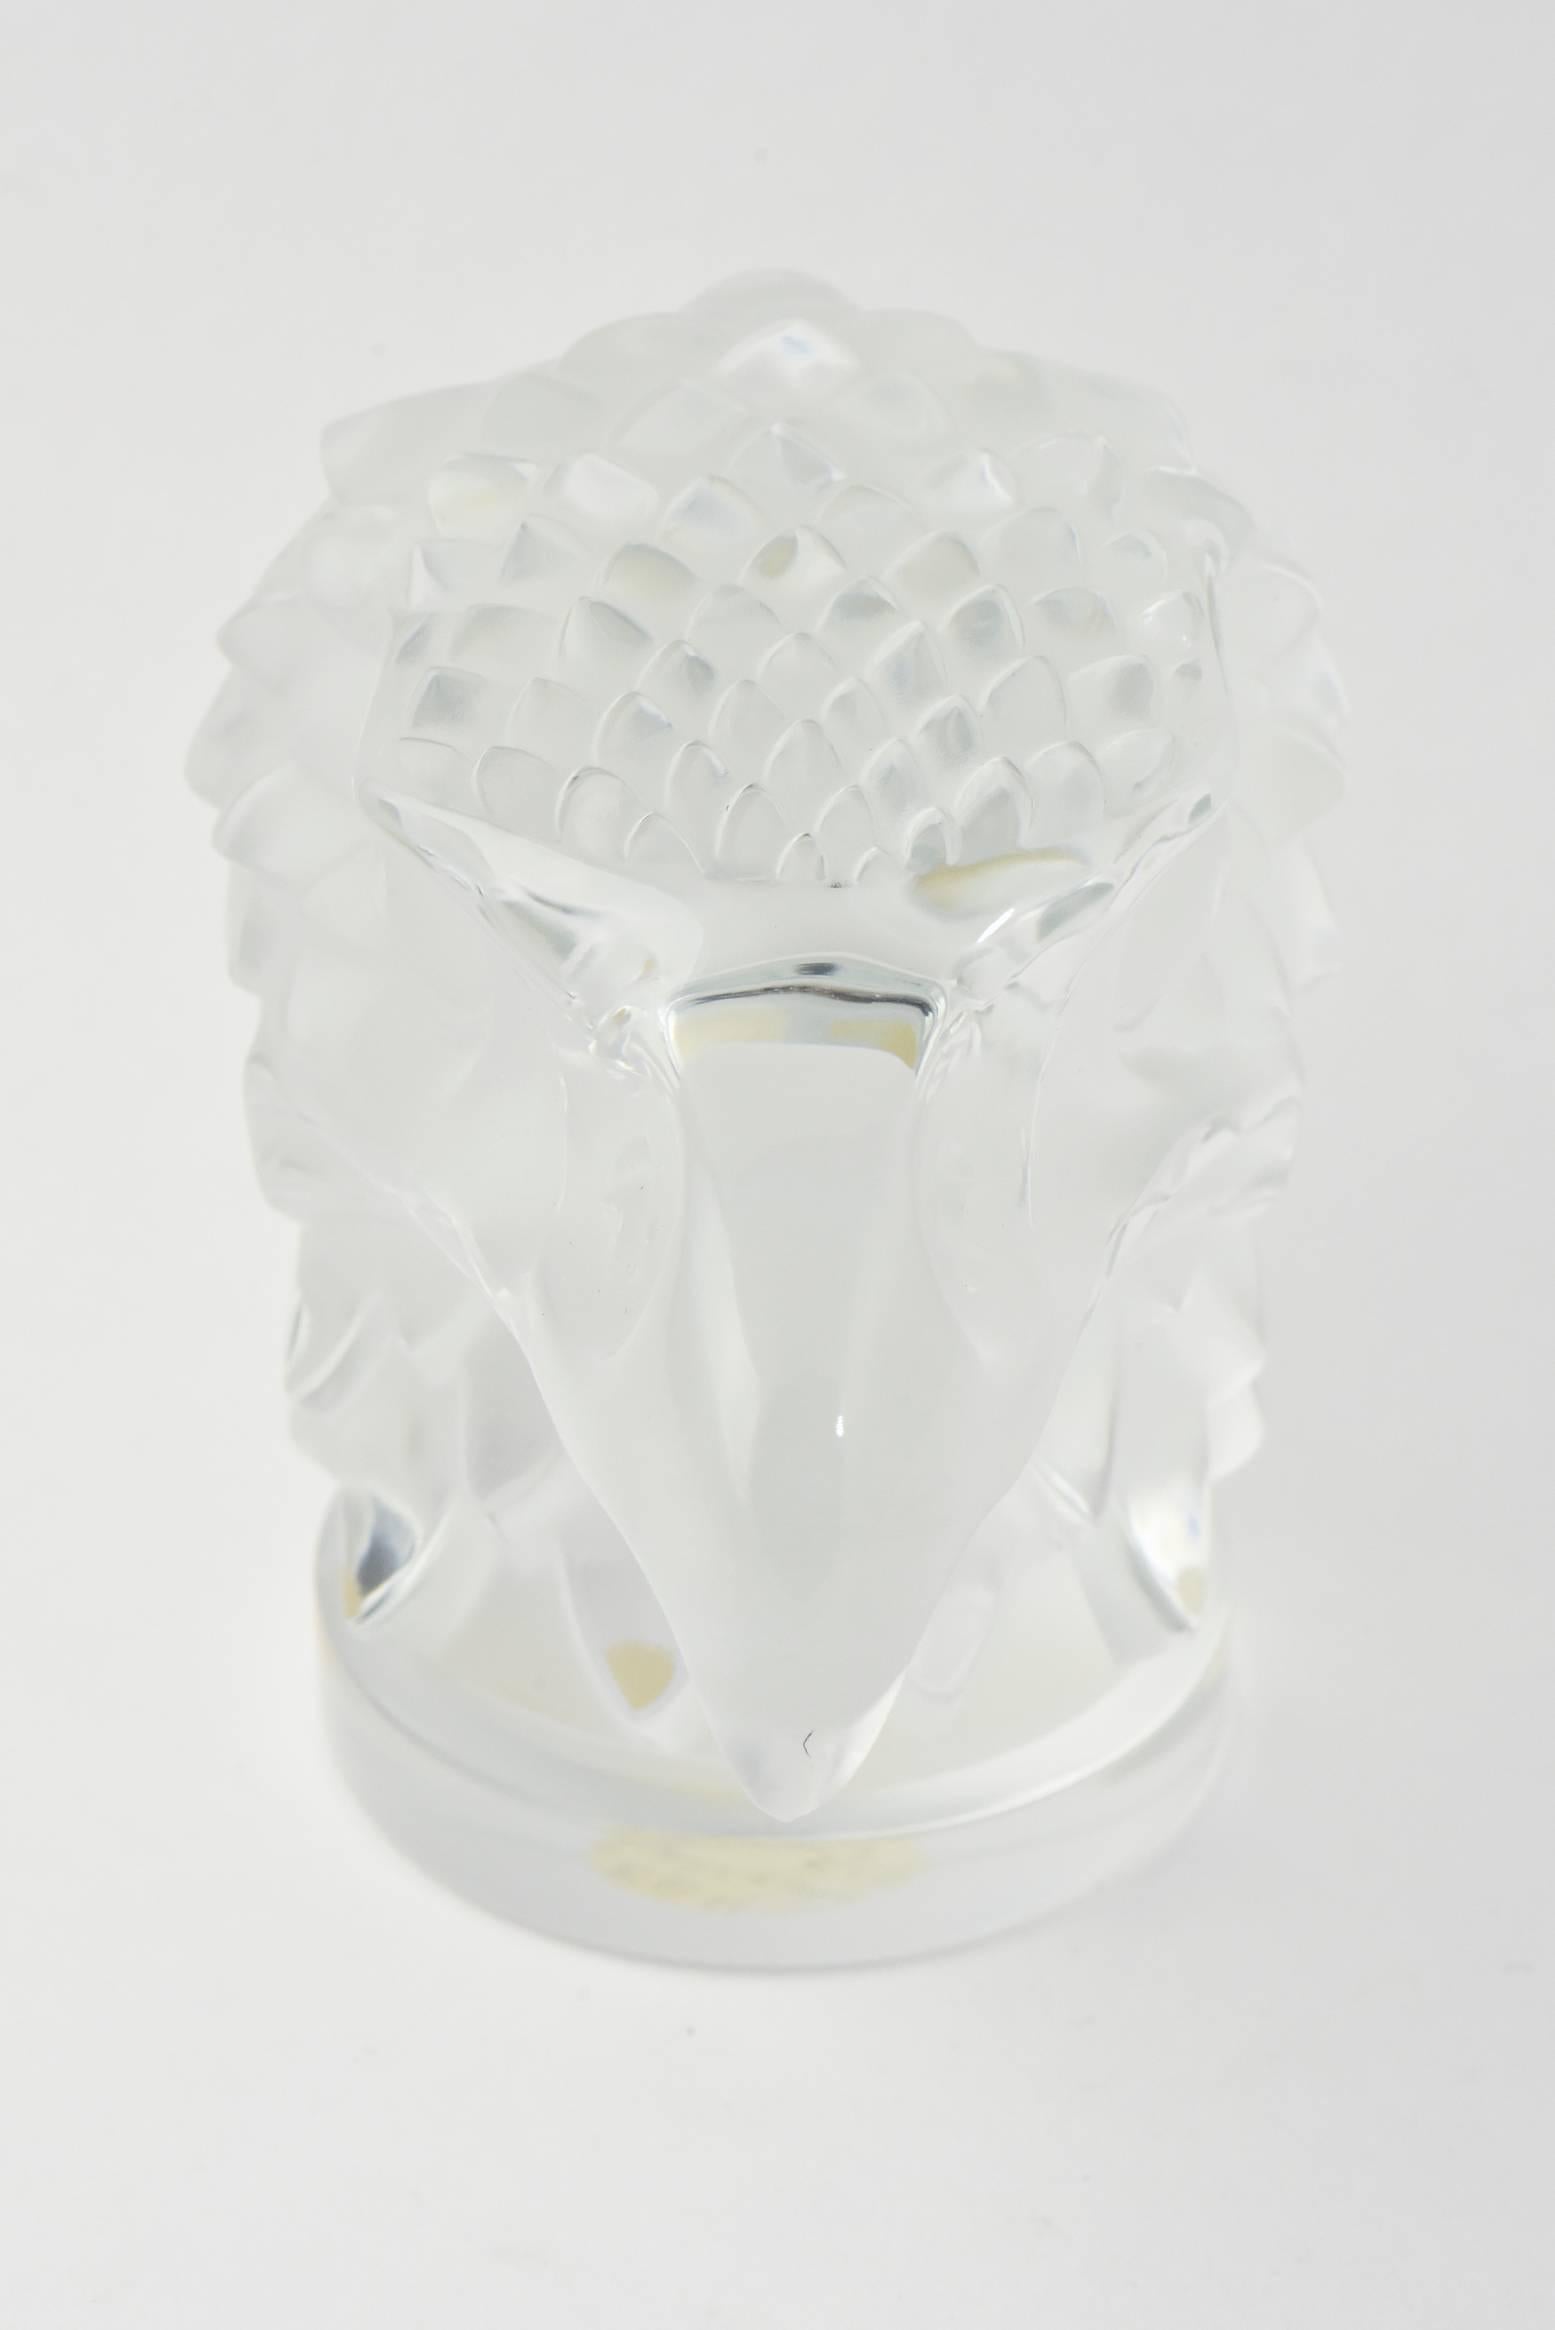 This Lalique Tete d'aigle Eagle head is gracefully crafted out of frosted crystal by Lalique's master glass workers. This design was originally made as a car hood ornament / mascot in the 1920s by Lalique. This piece is from the late 20th century.